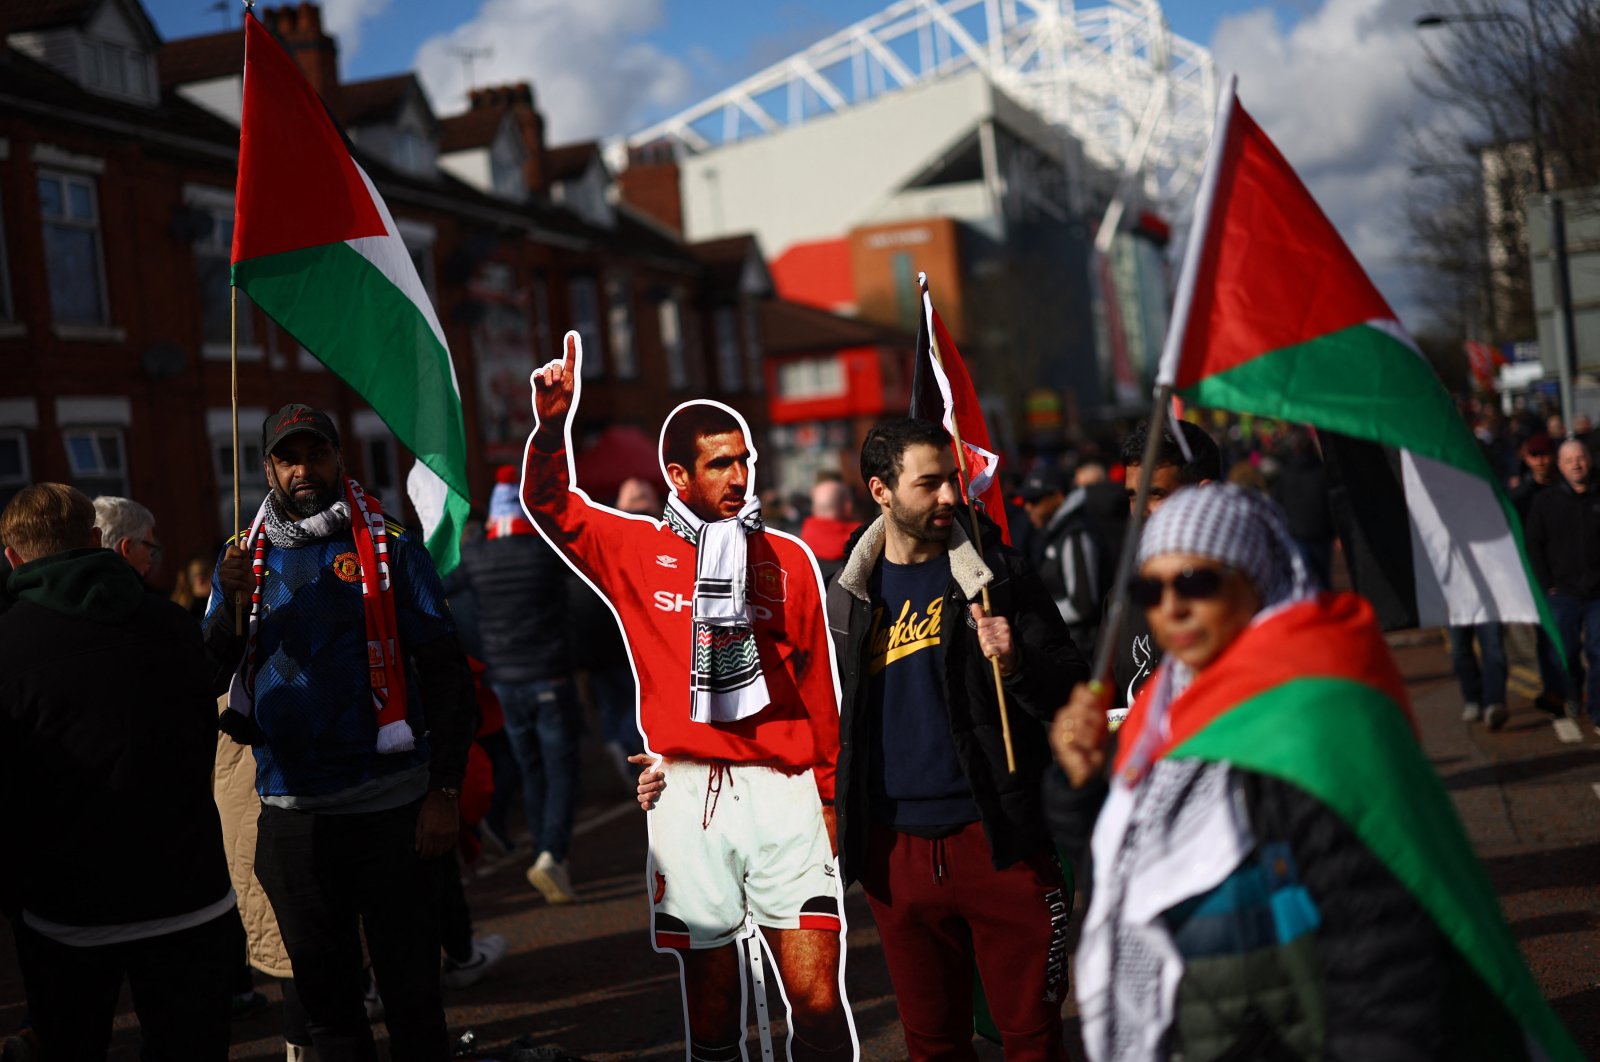 Manchester United fans carrying the flag of Palestine and a cardboard cutout of former player Eric Cantona are pictured outside Old Trafford stadium before the match against Fulham, Manchester, U.K., Feb. 24, 2024. (Reuters Photo)